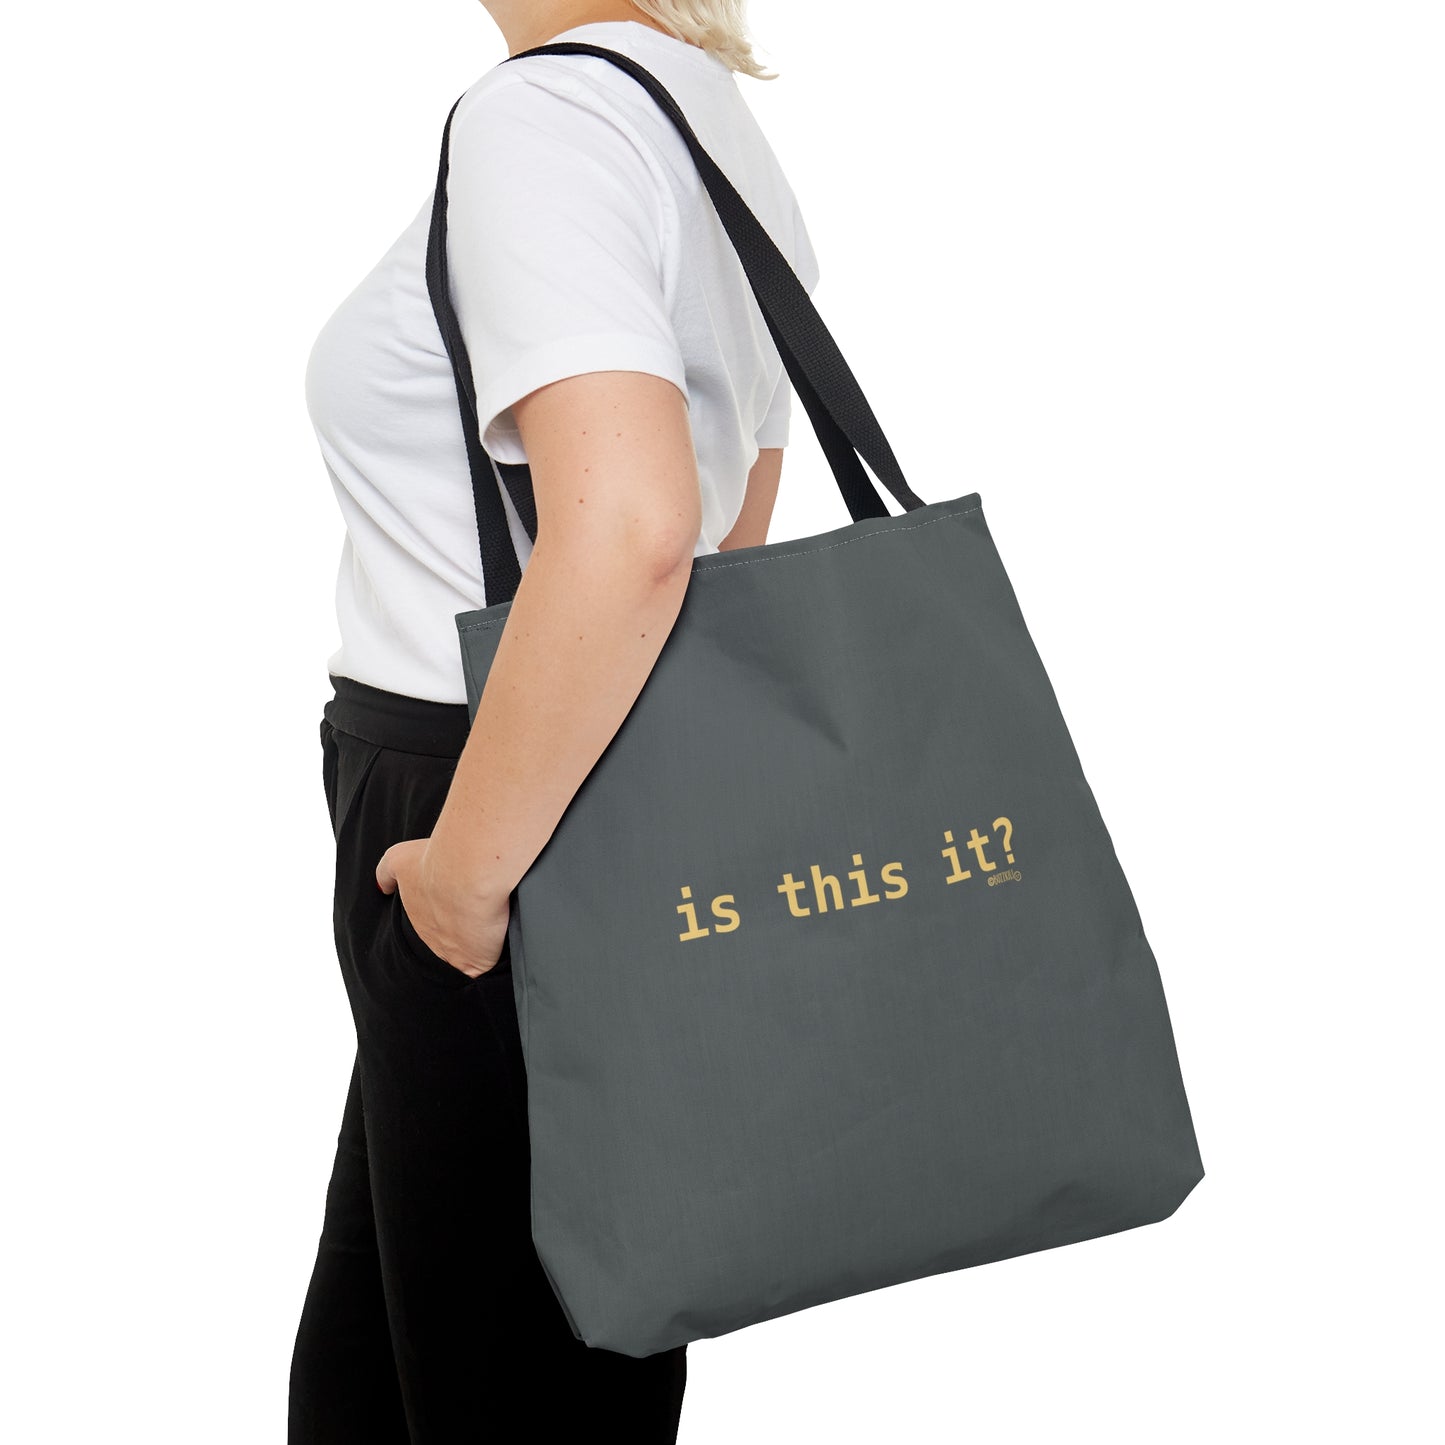 Is This It? - Tote Bag